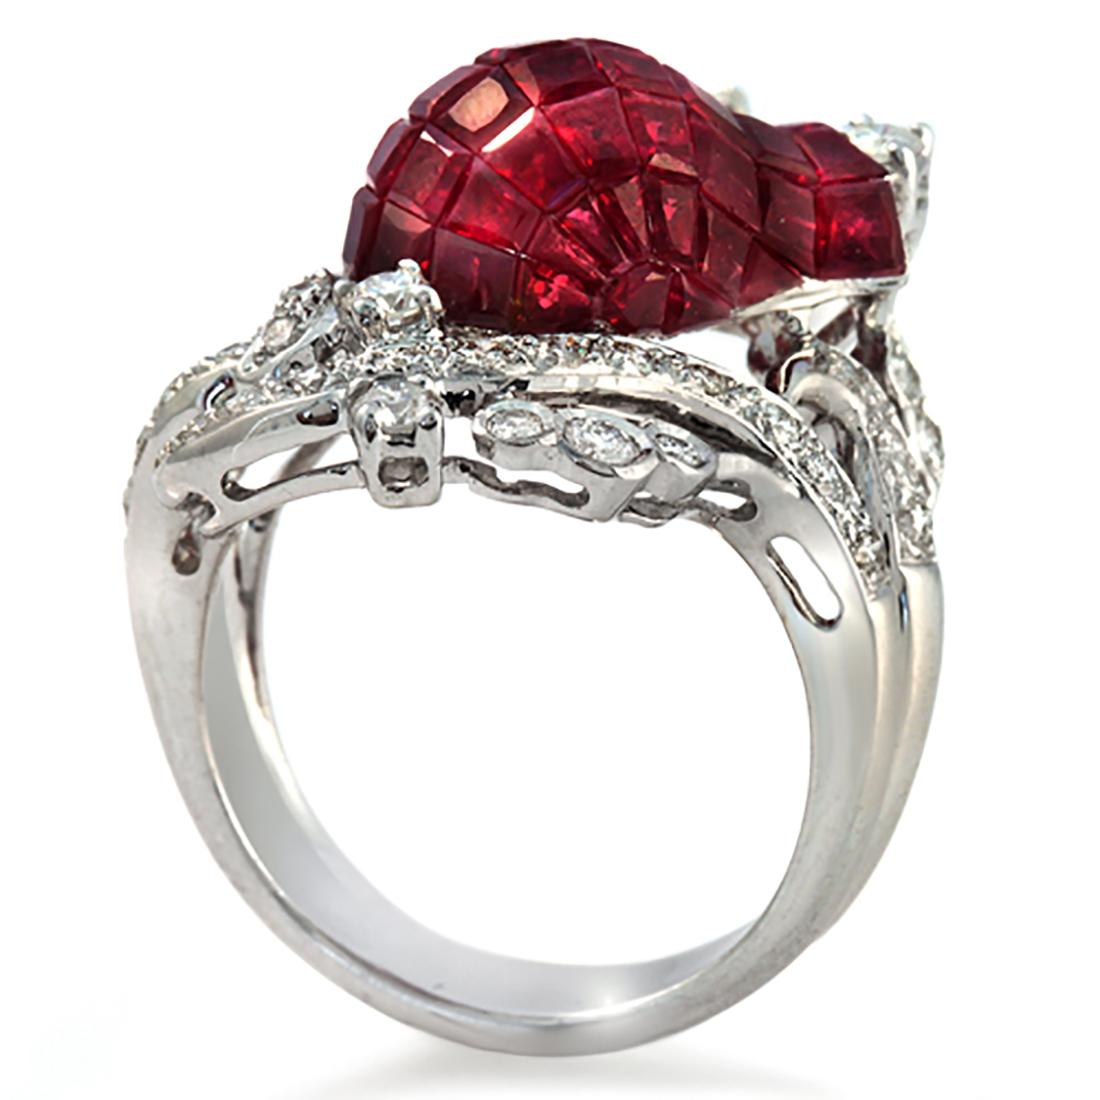 Top: 30 mm
Band Width: 4.5 mm
Metal: 18K White Gold
Size: 6
Hallmarks: 18K
Total Weight: 9.7 Grams
Stone Type: 0.92 Ct Diamonds VS2 G-F & 11.58 CT Natural Ruby
Condition: New
Stock Number: R2714
Estimated Retail Price: 14915